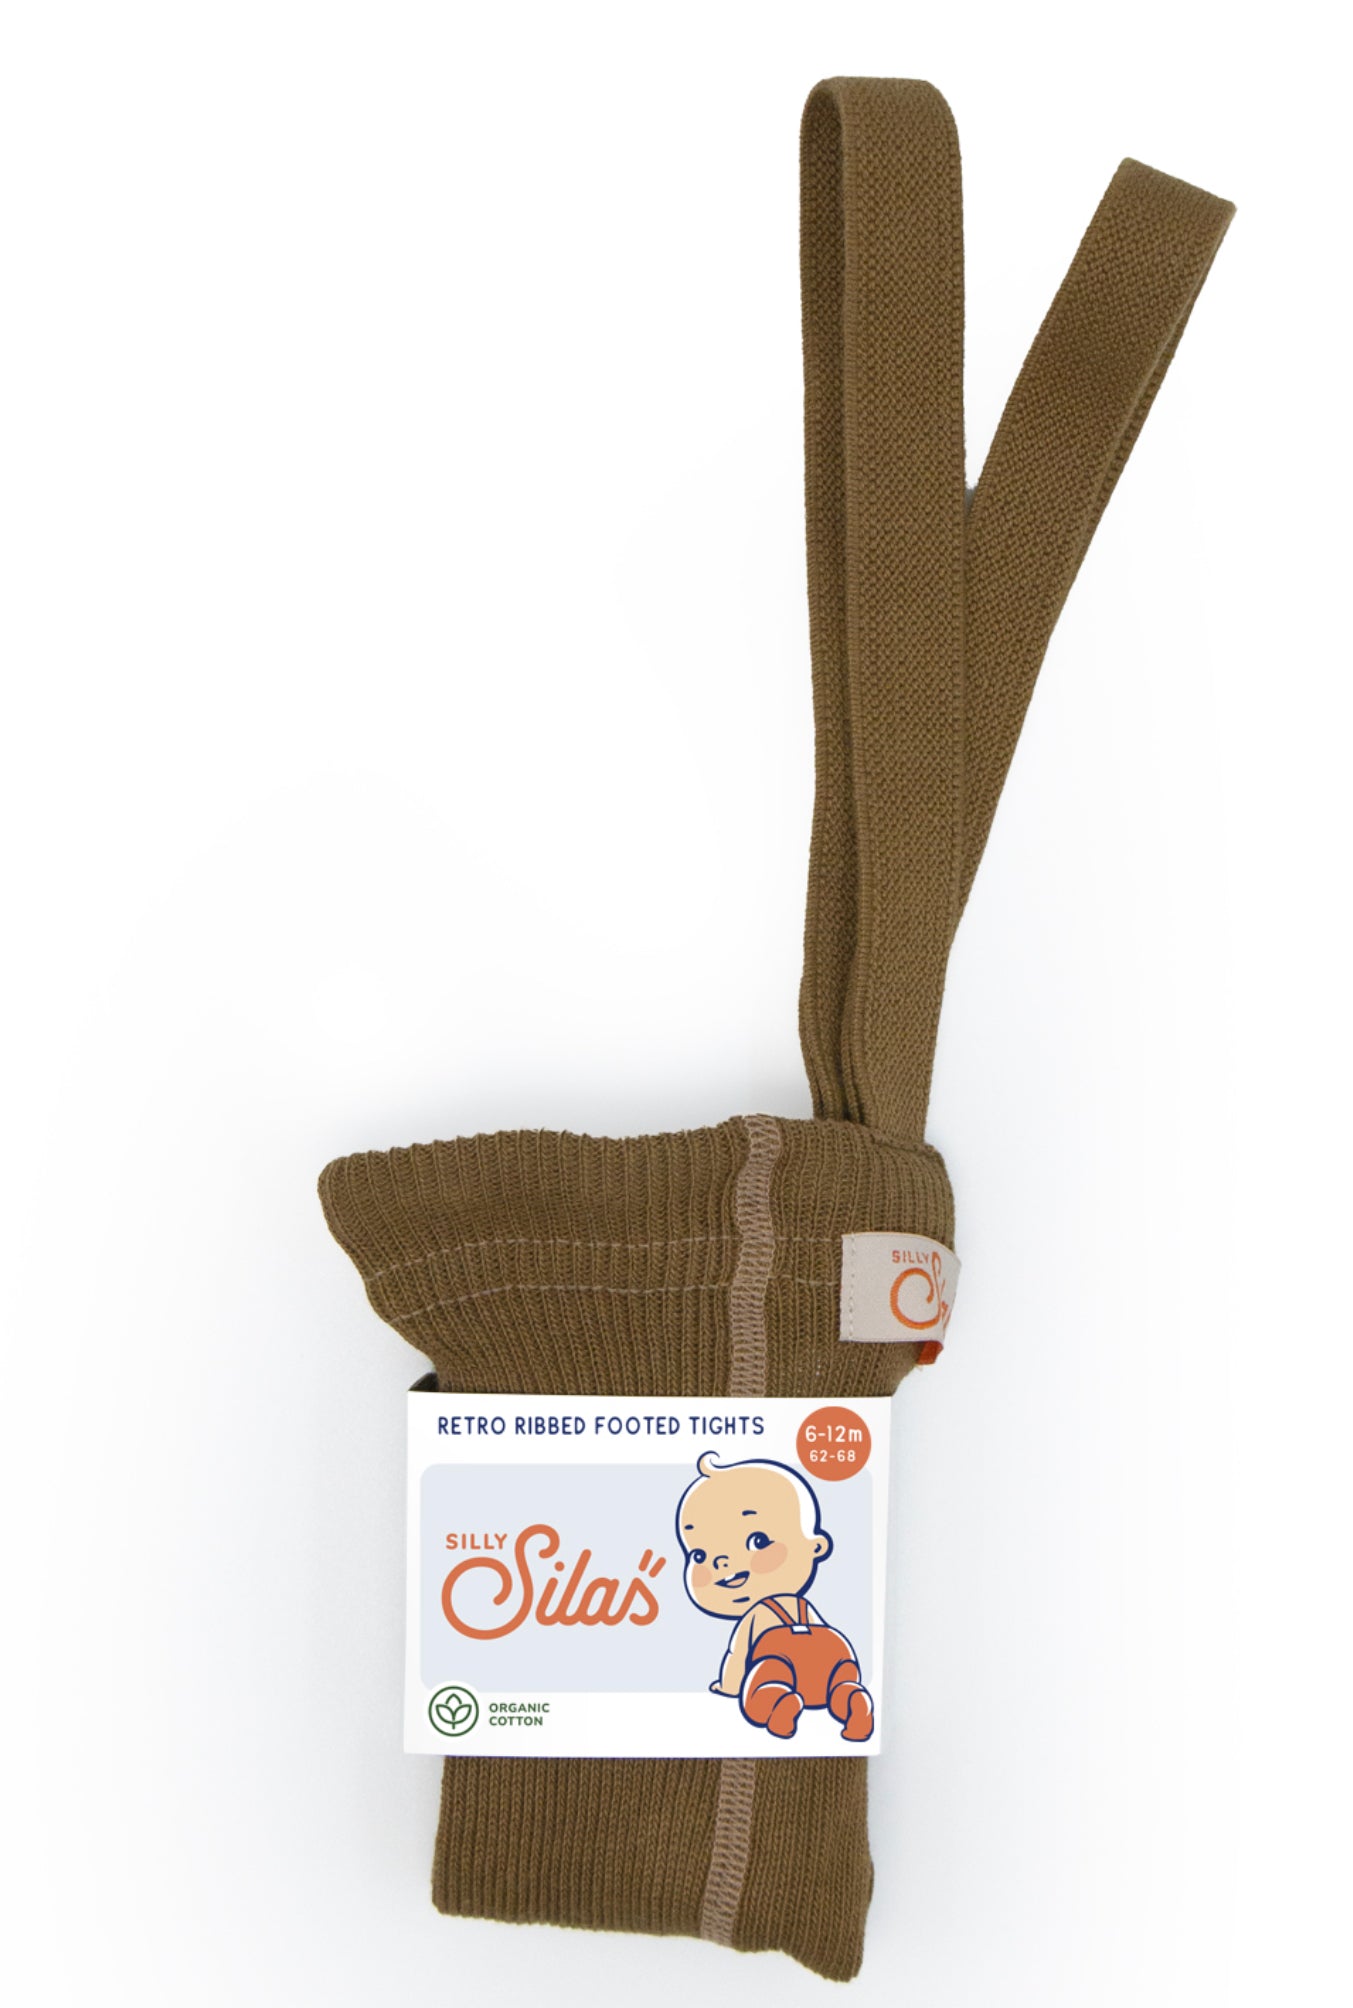 Load image into Gallery viewer, Silly silas retro tights, retro tights with braces, acorn brown silly silas tights, silly silas nottingham stockist, midlands baby shop, independent kids shop, kids tights
